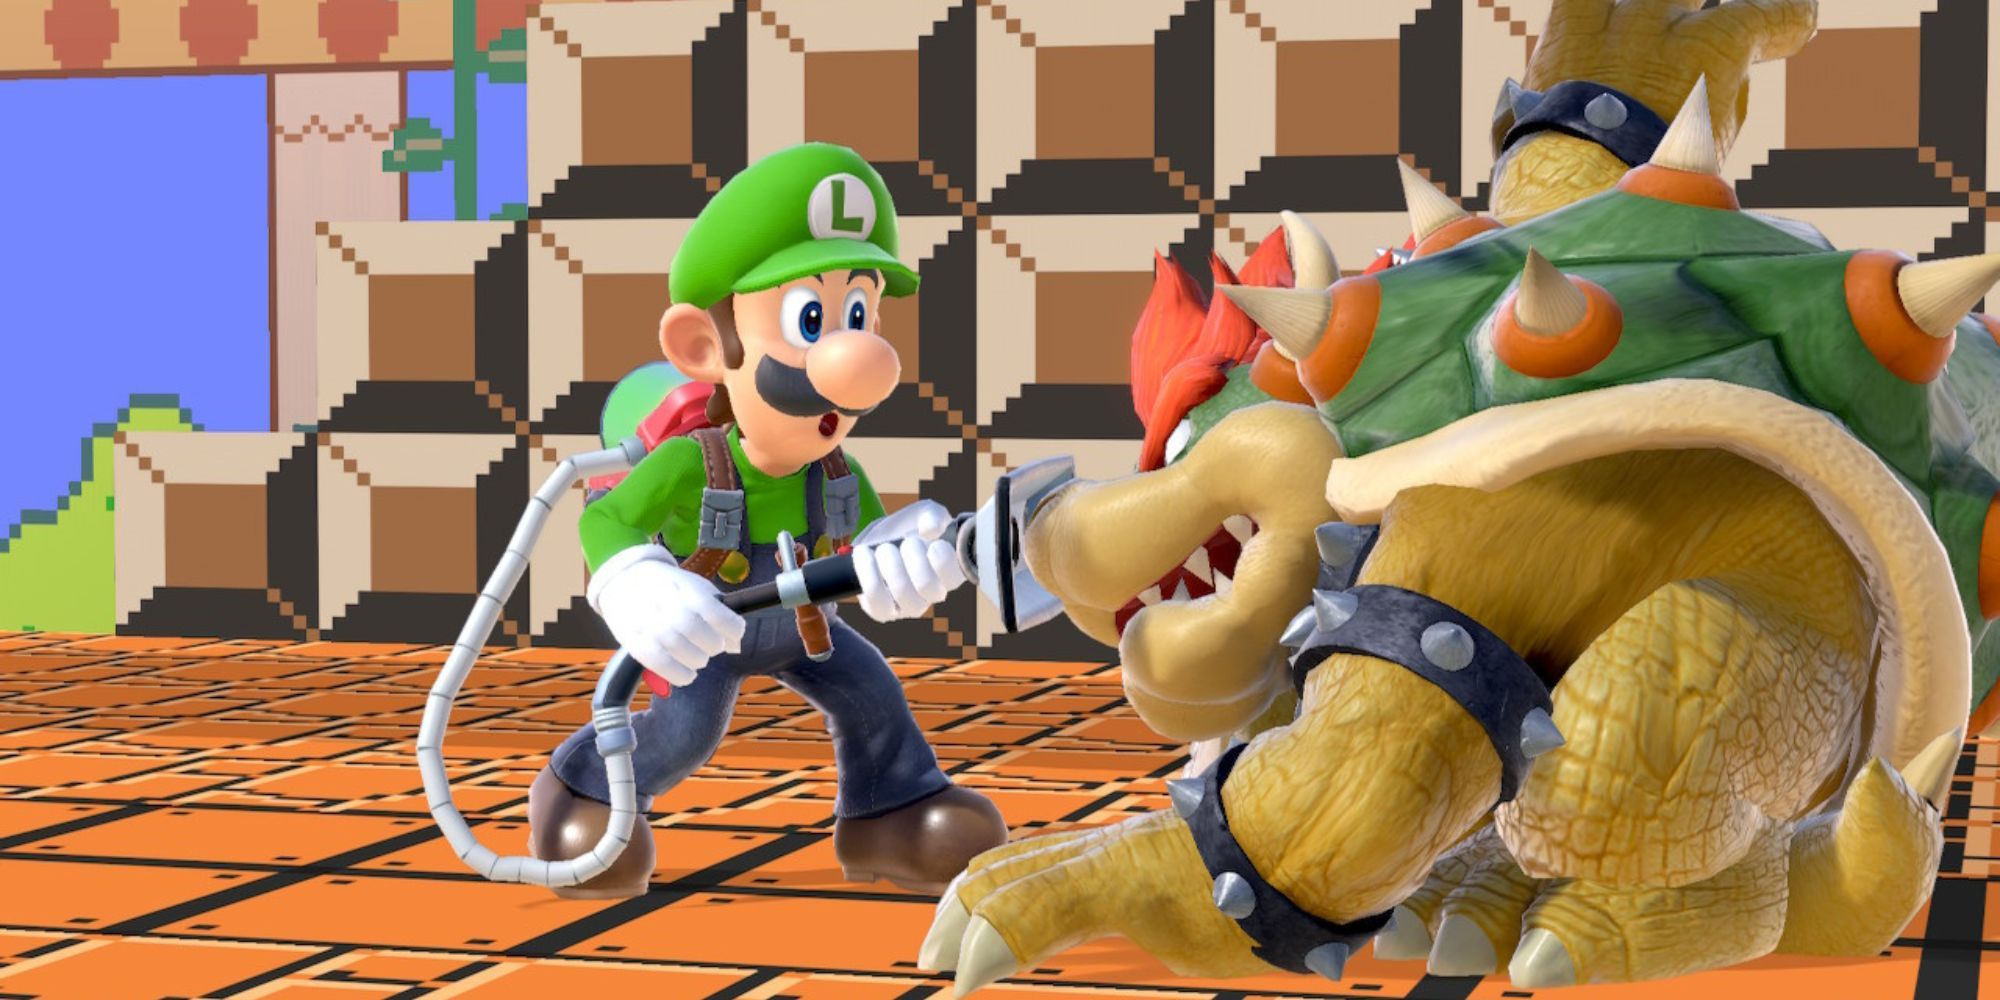 Luigi holds Bowser by the nose with his vacuum on the Mushroom Kingdom stage